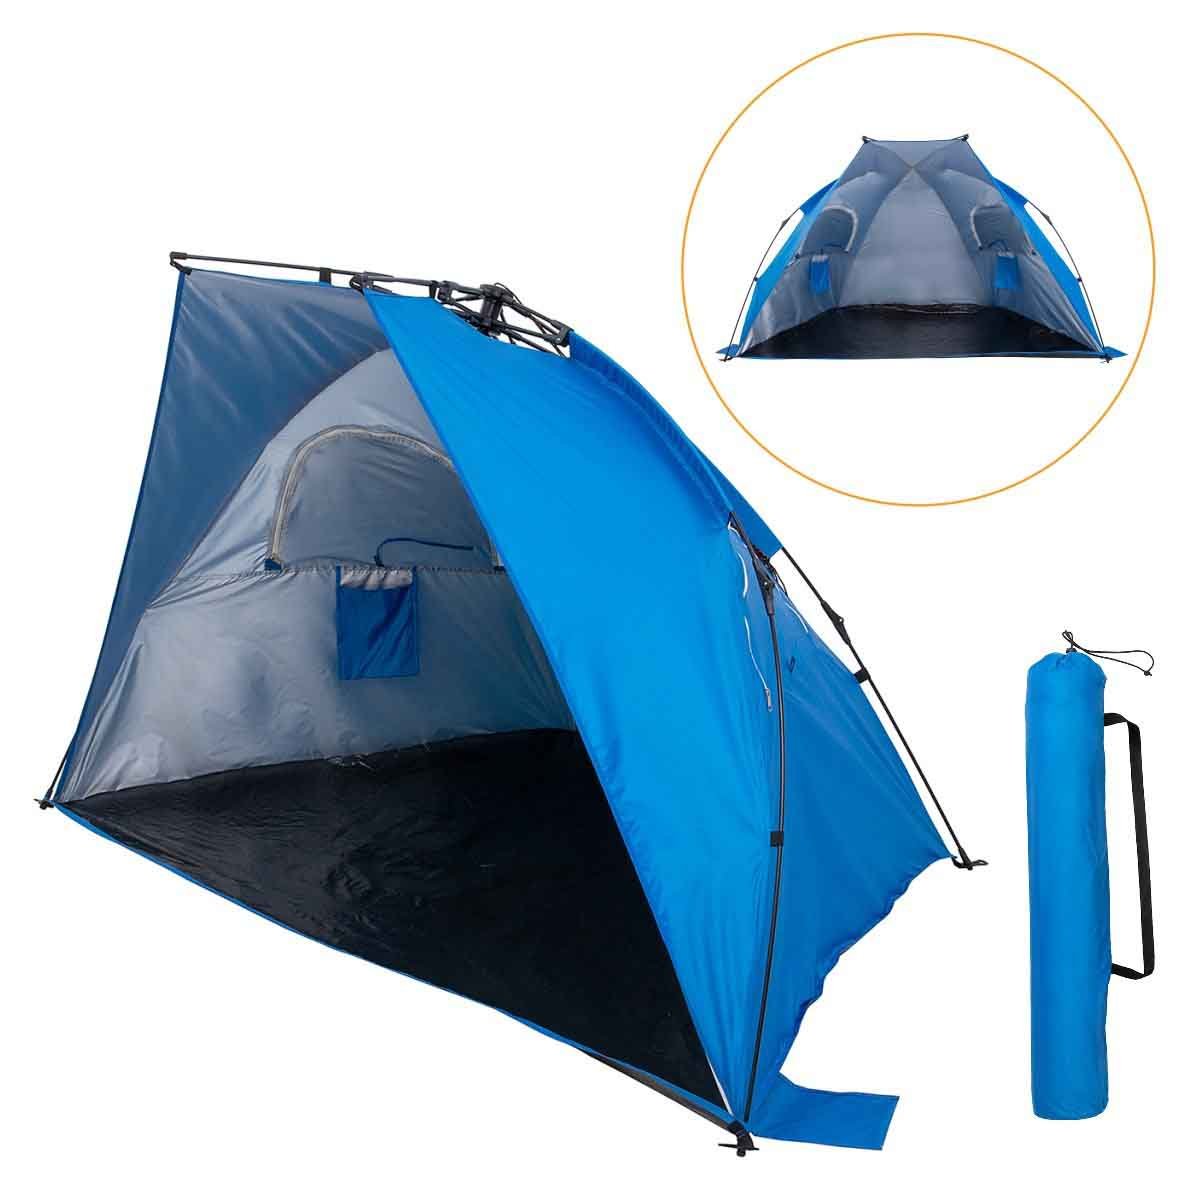 2 Person Easy Up Beach Tent Sun Shade Shelter UPF 50+ is roomy and could be packed into a carry bag